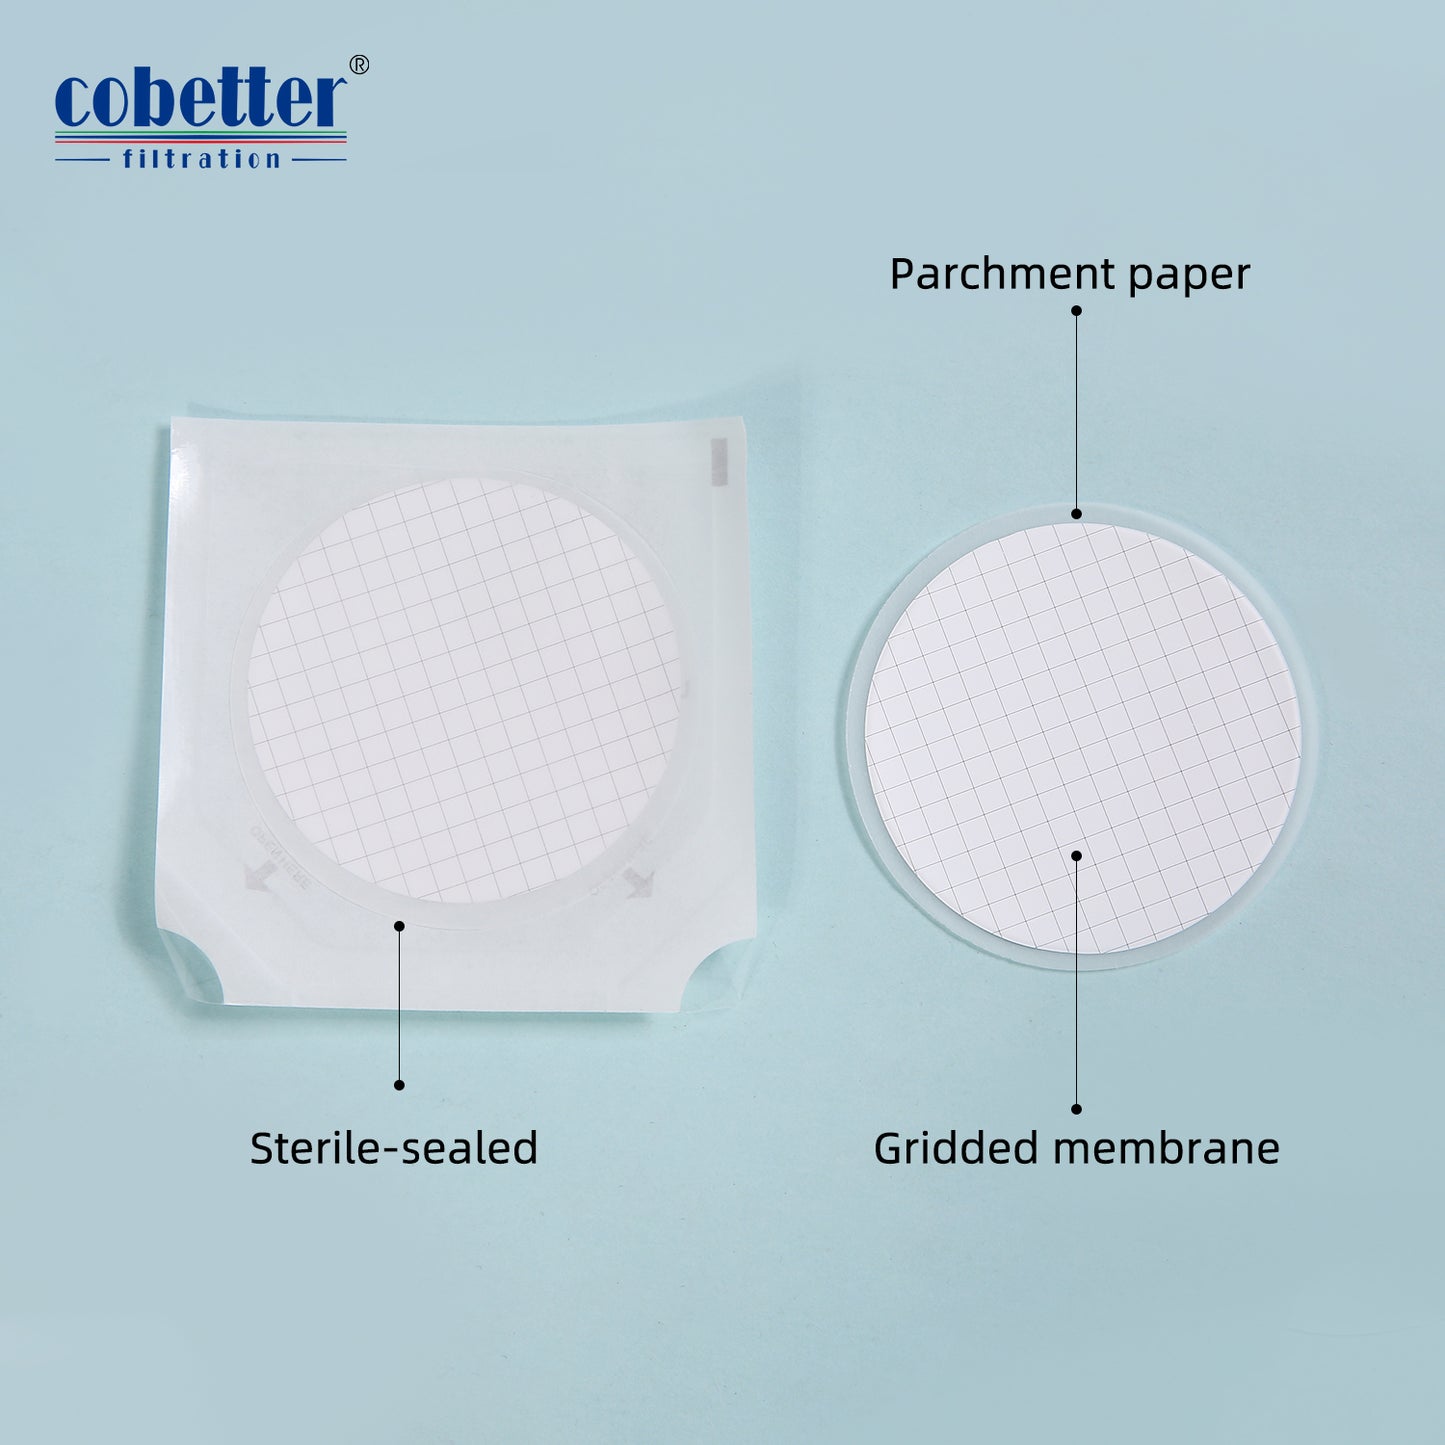 COBETTER MCE Membrane Filter, White with Grid, Sterile, Packaged Individually